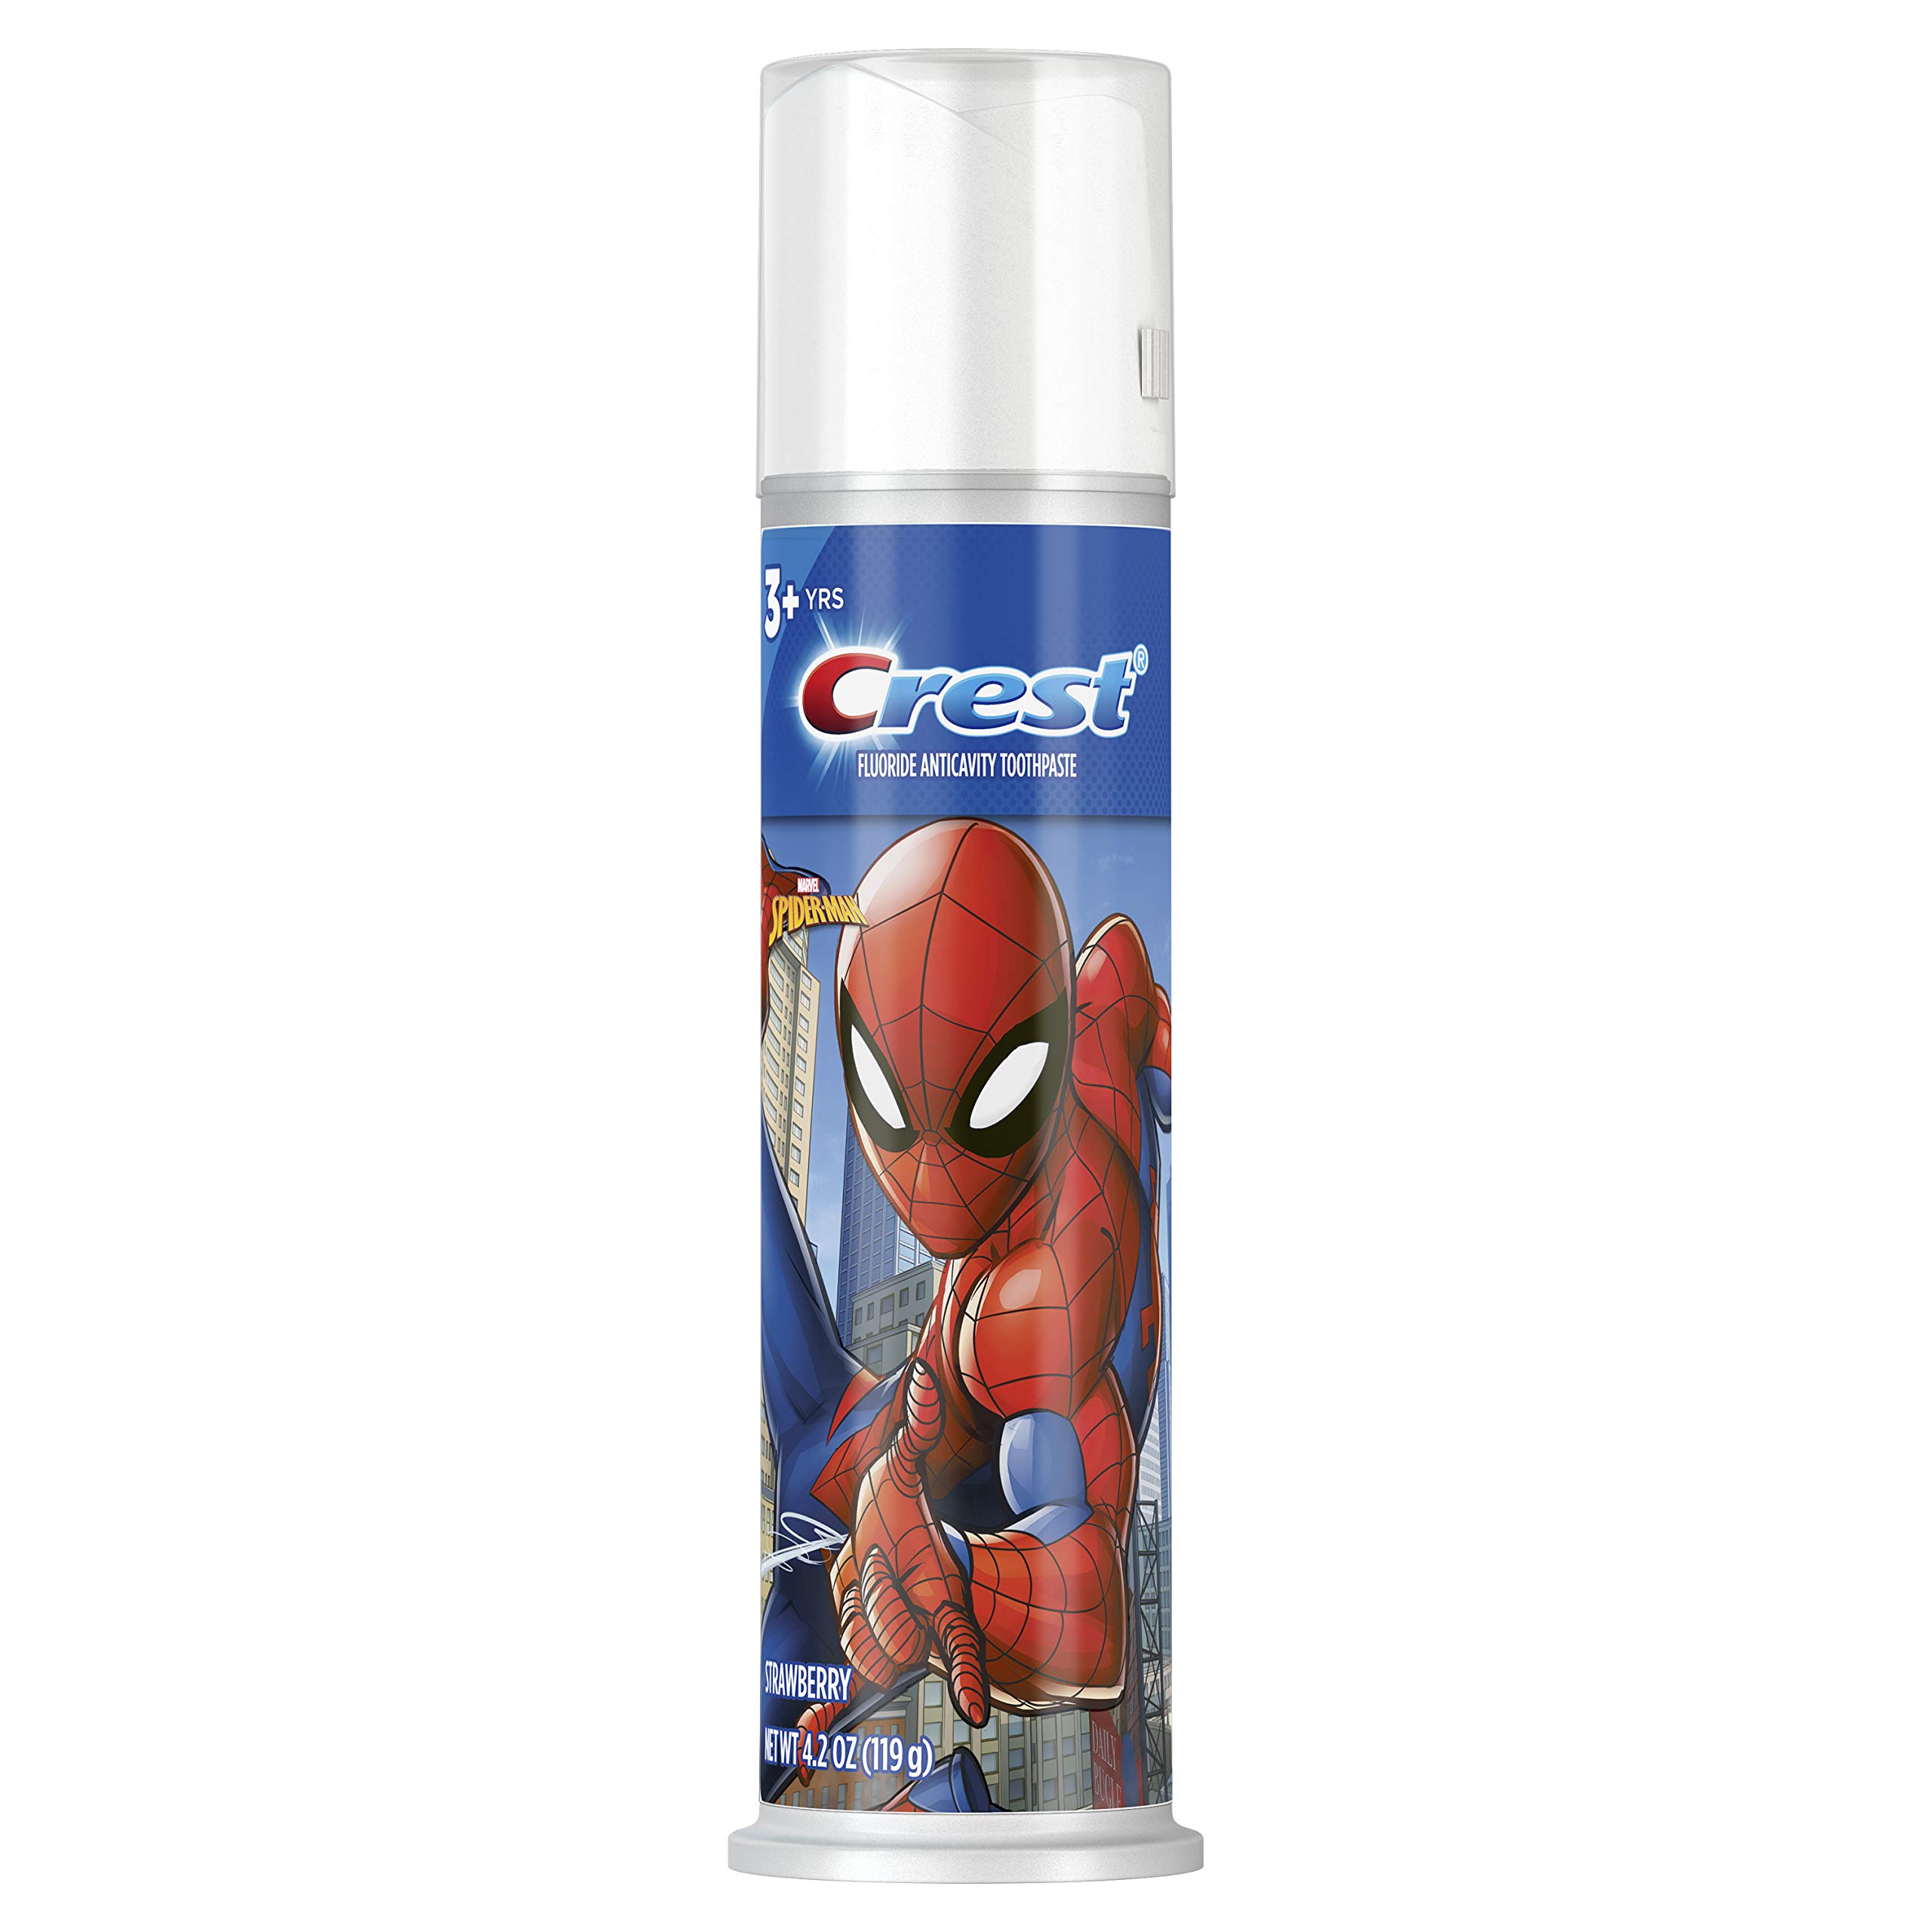 Book Cover Crest Kid's Toothpaste Pump, featuring Marvel's Spiderman, Strawberry Flavor, 4.2 oz Pump - NEW!